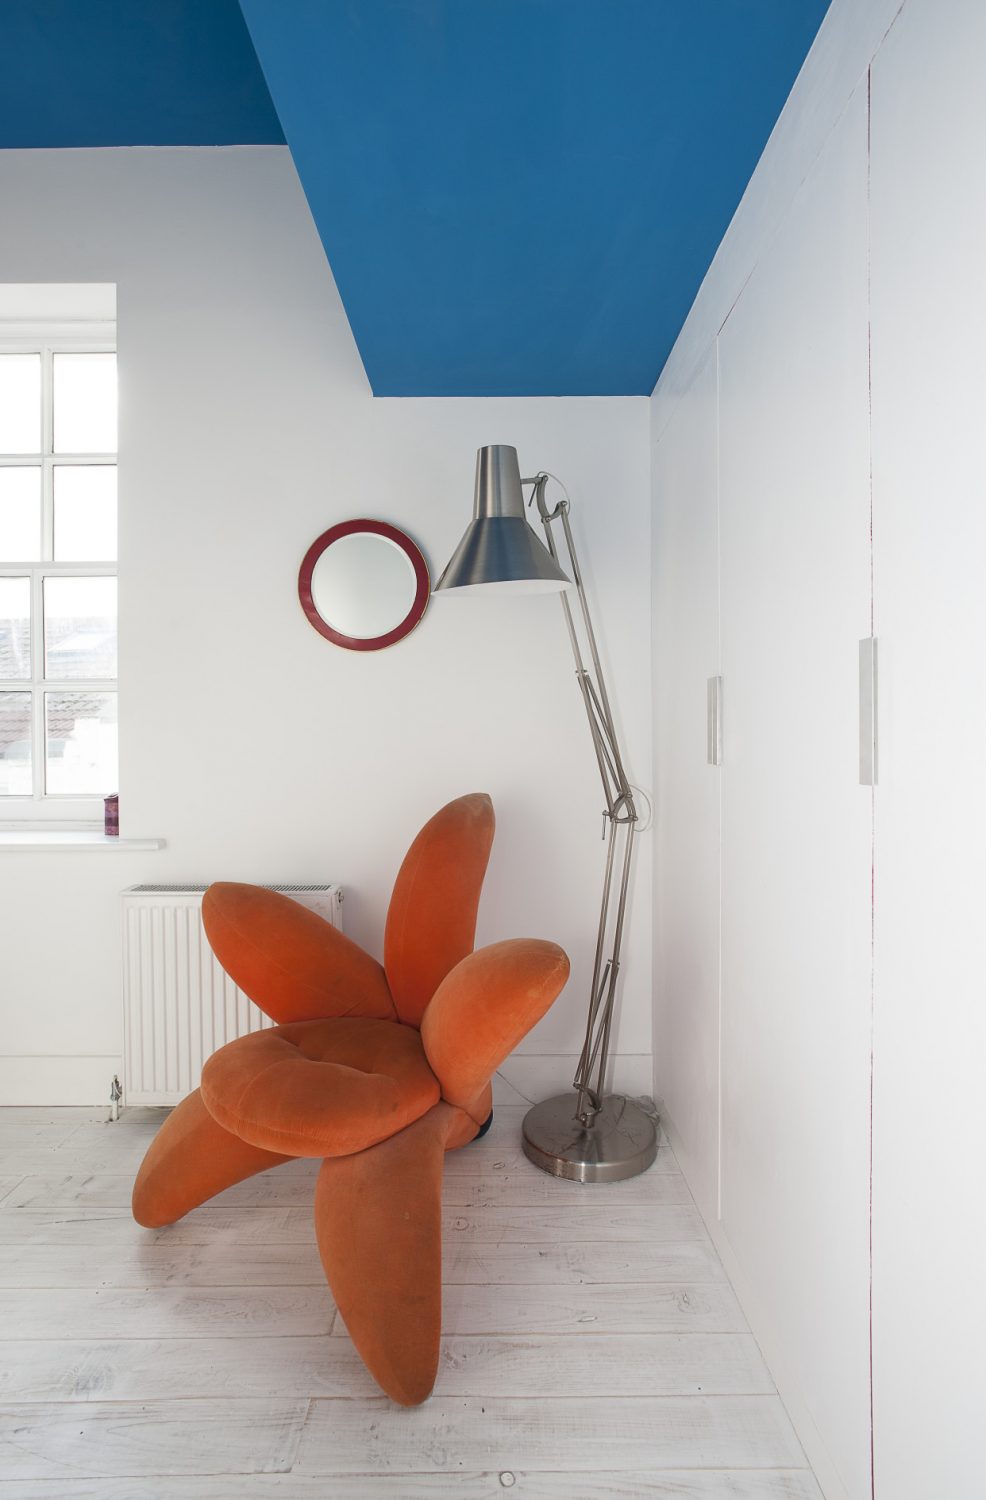 A second guest bedroom is home to a vibrant upholstered lily chair by Japanese designer Masanori Umeda